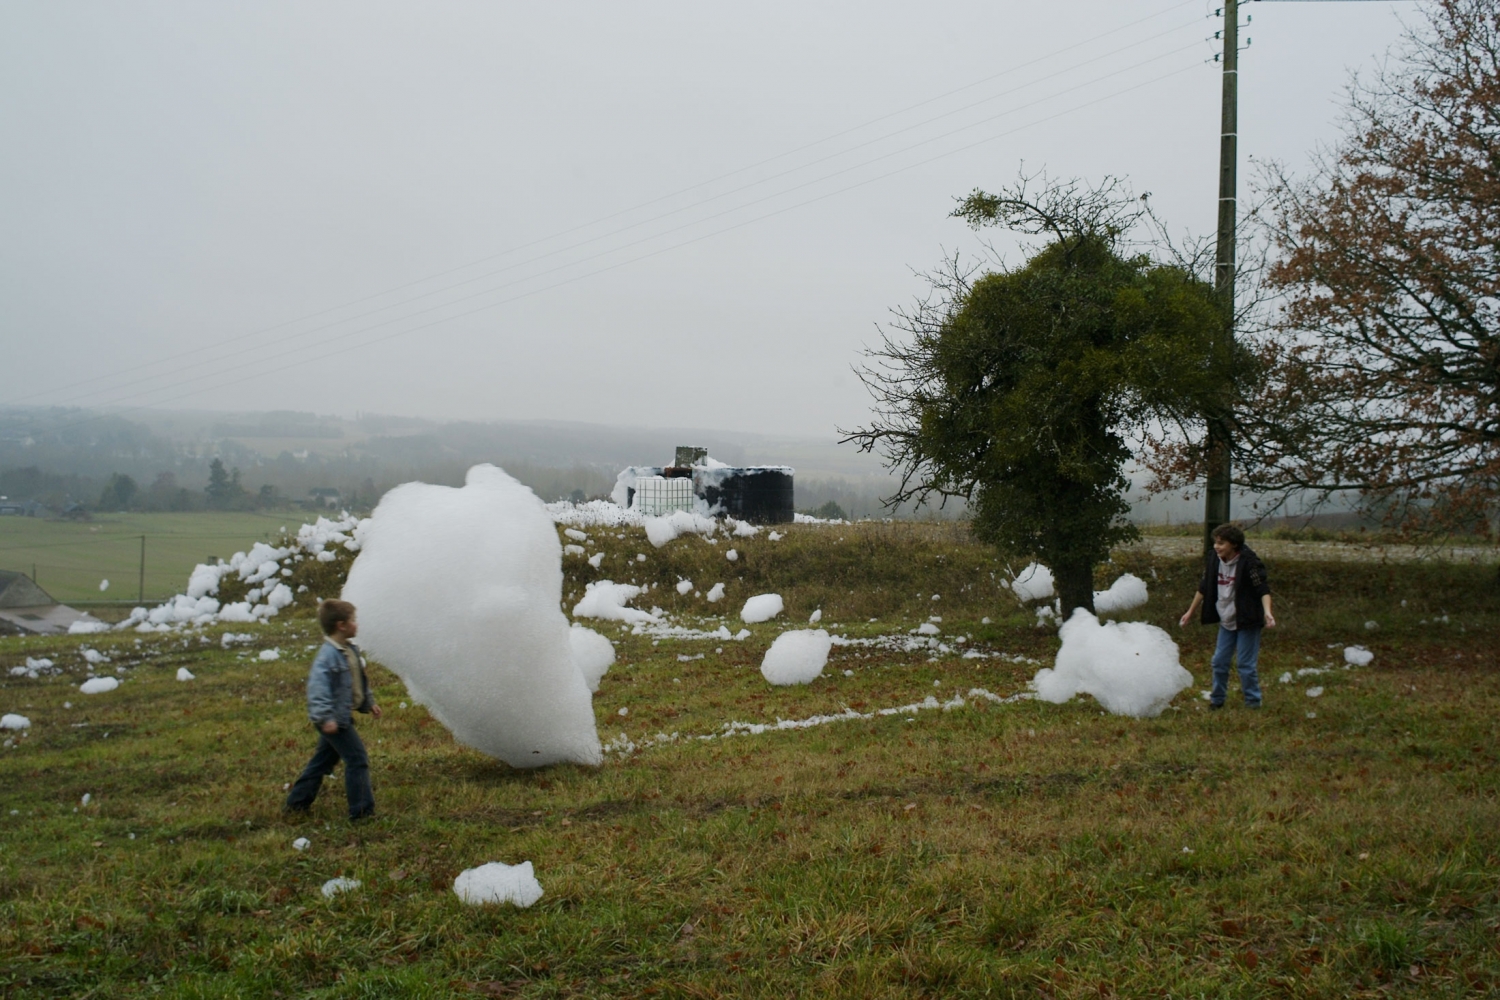 Roger Hiorns
A retrospective view of the pathway, 2008 &amp;ndash; ongoing
Foam, compressor, and stainless steel tanks
Dimensions variable
Installation view, 2008
Atelier Calder, Sach&amp;eacute;, France